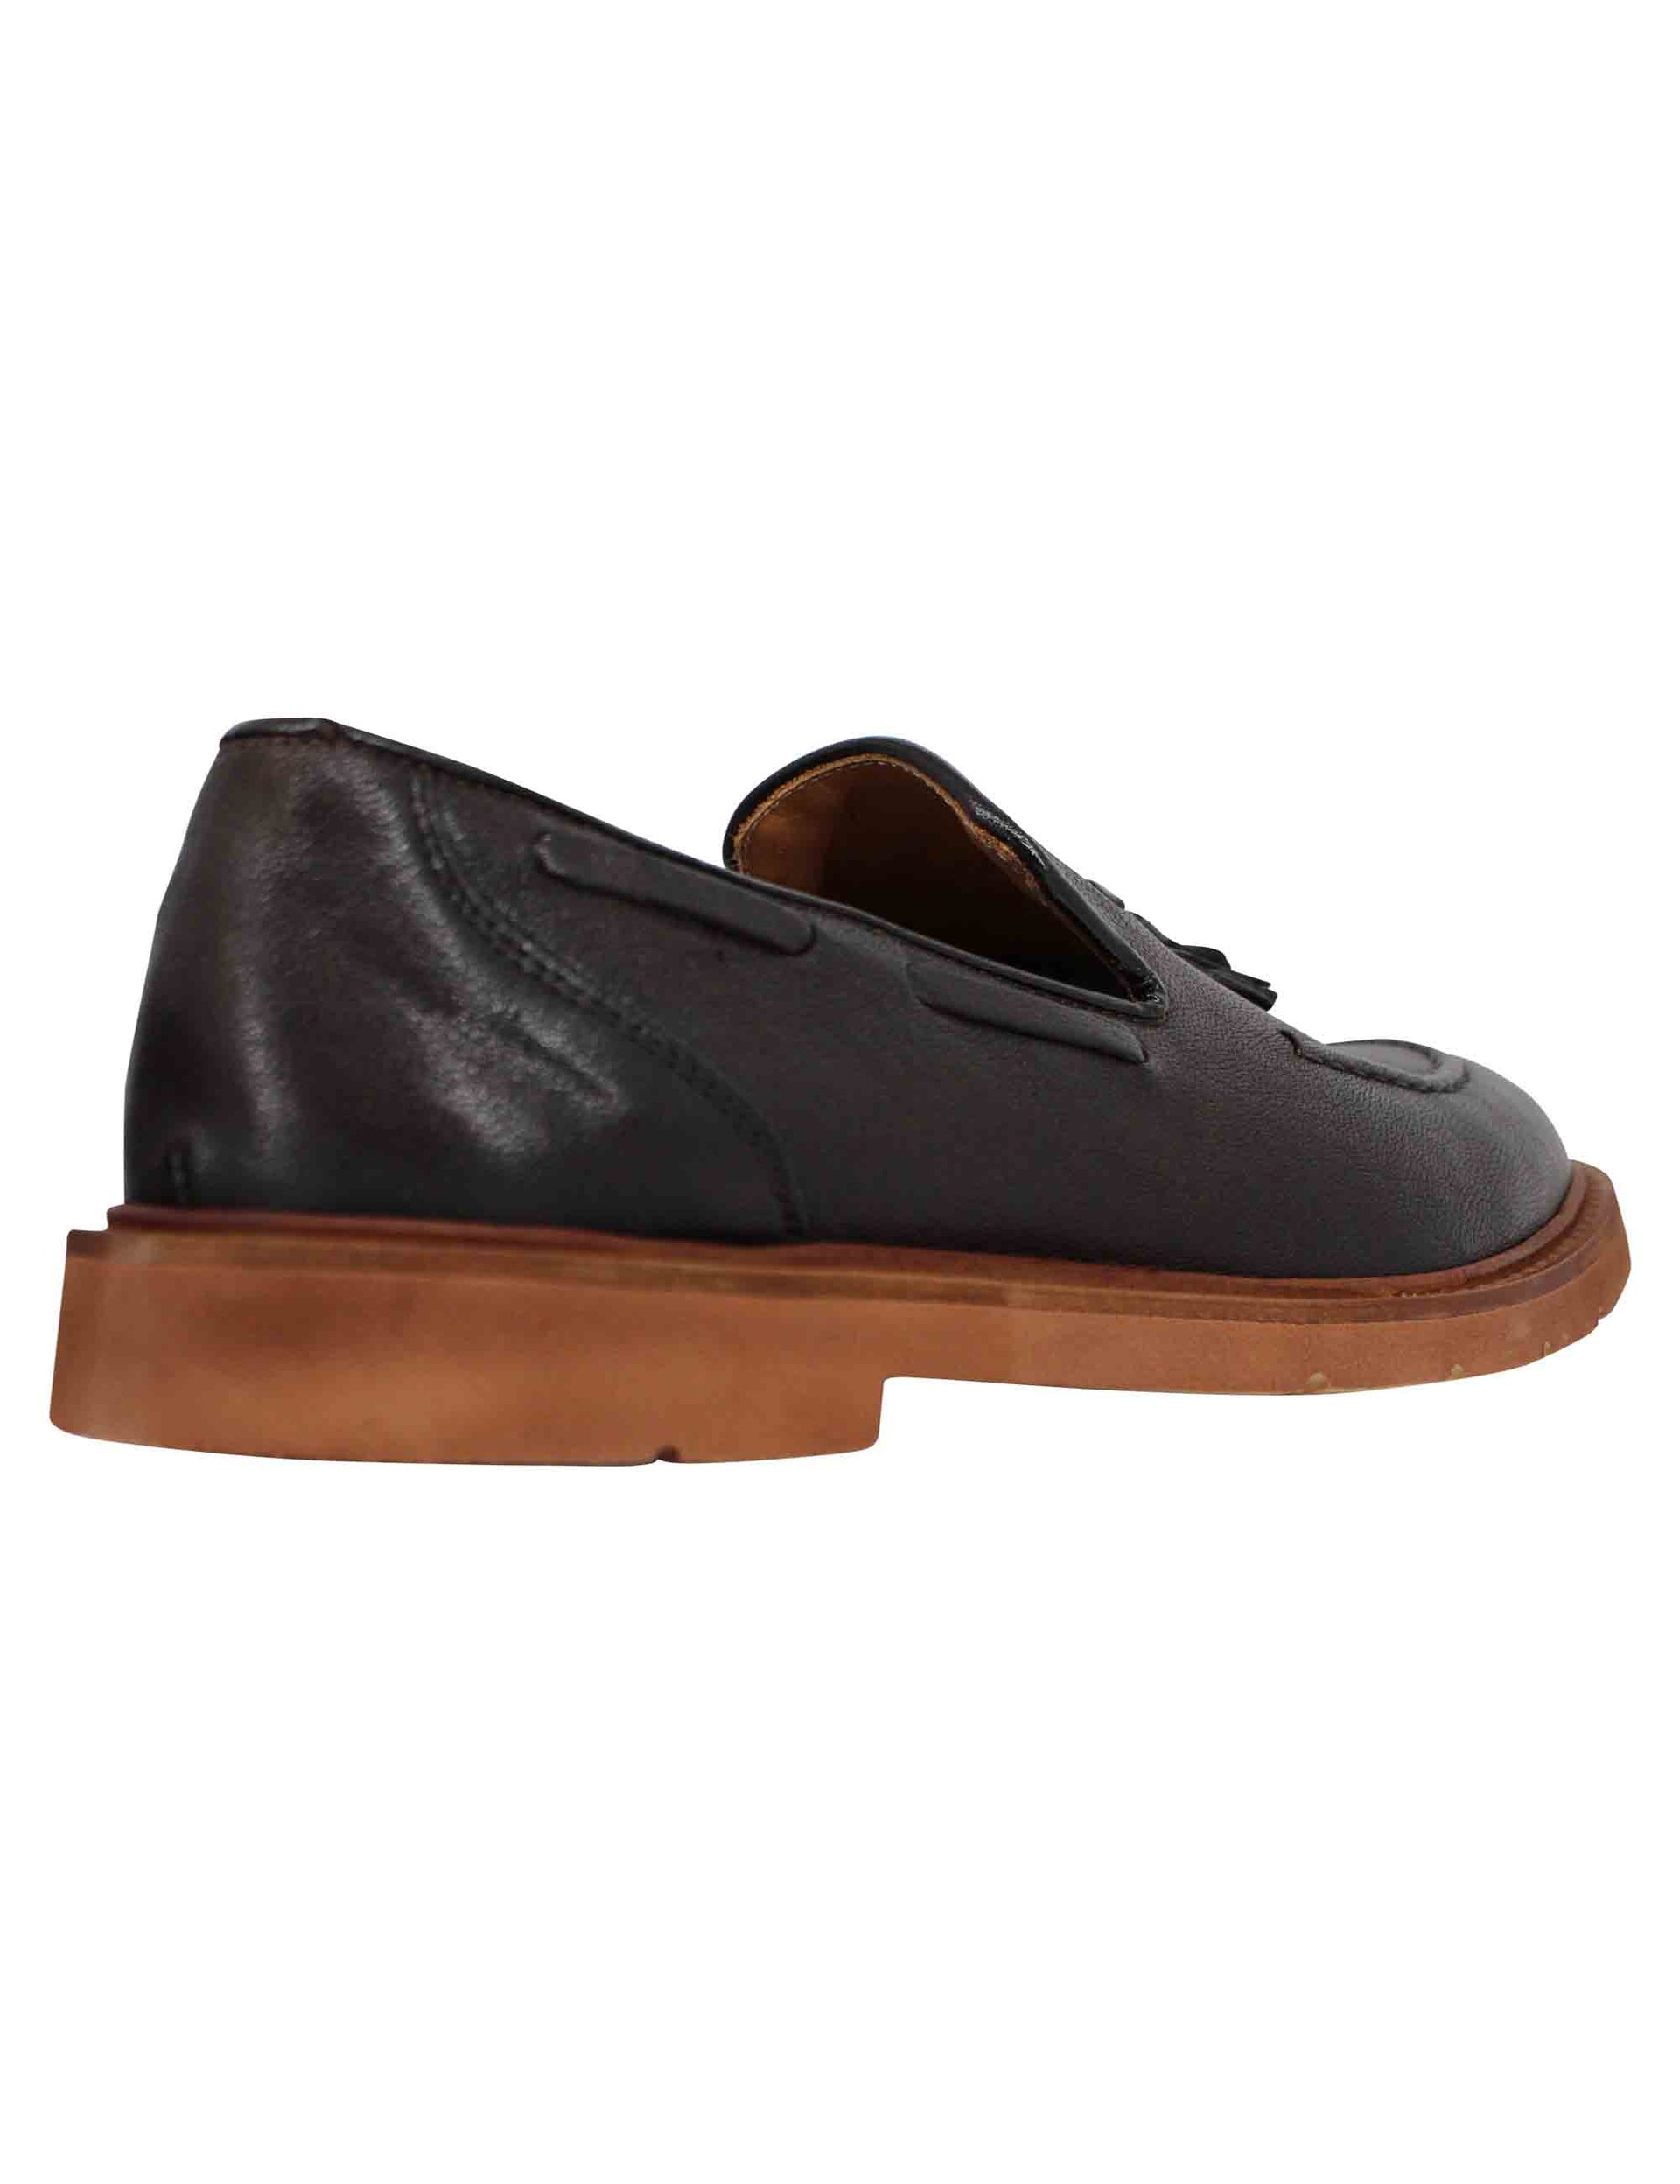 Men's brown leather loafers with rubber sole